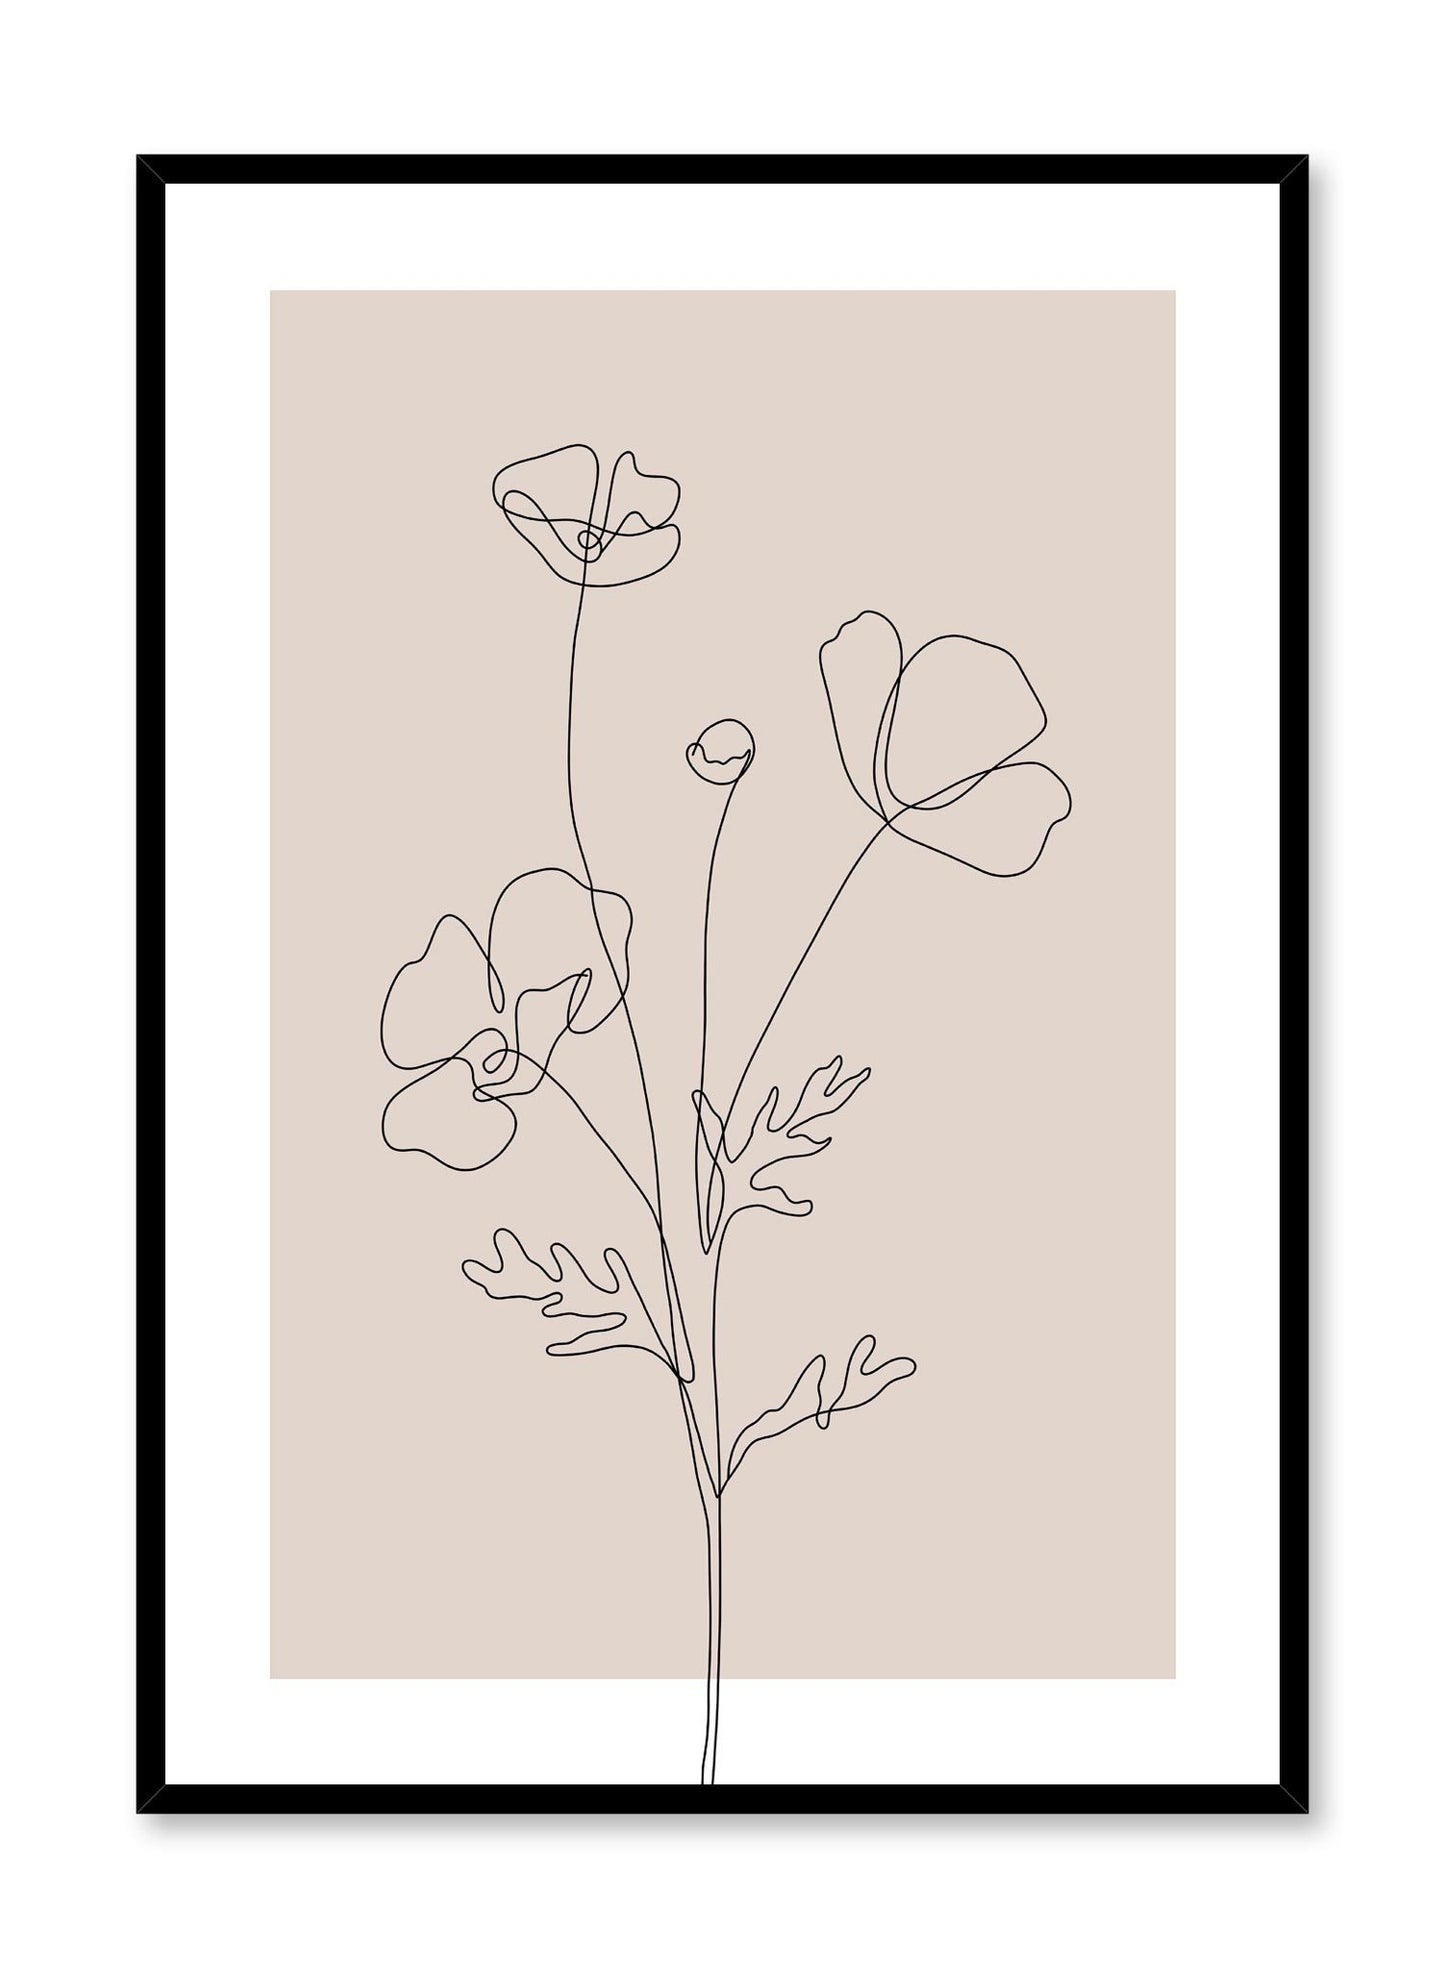 Minimalist design poster by Opposite Wall with line art drawing of poppy in pink